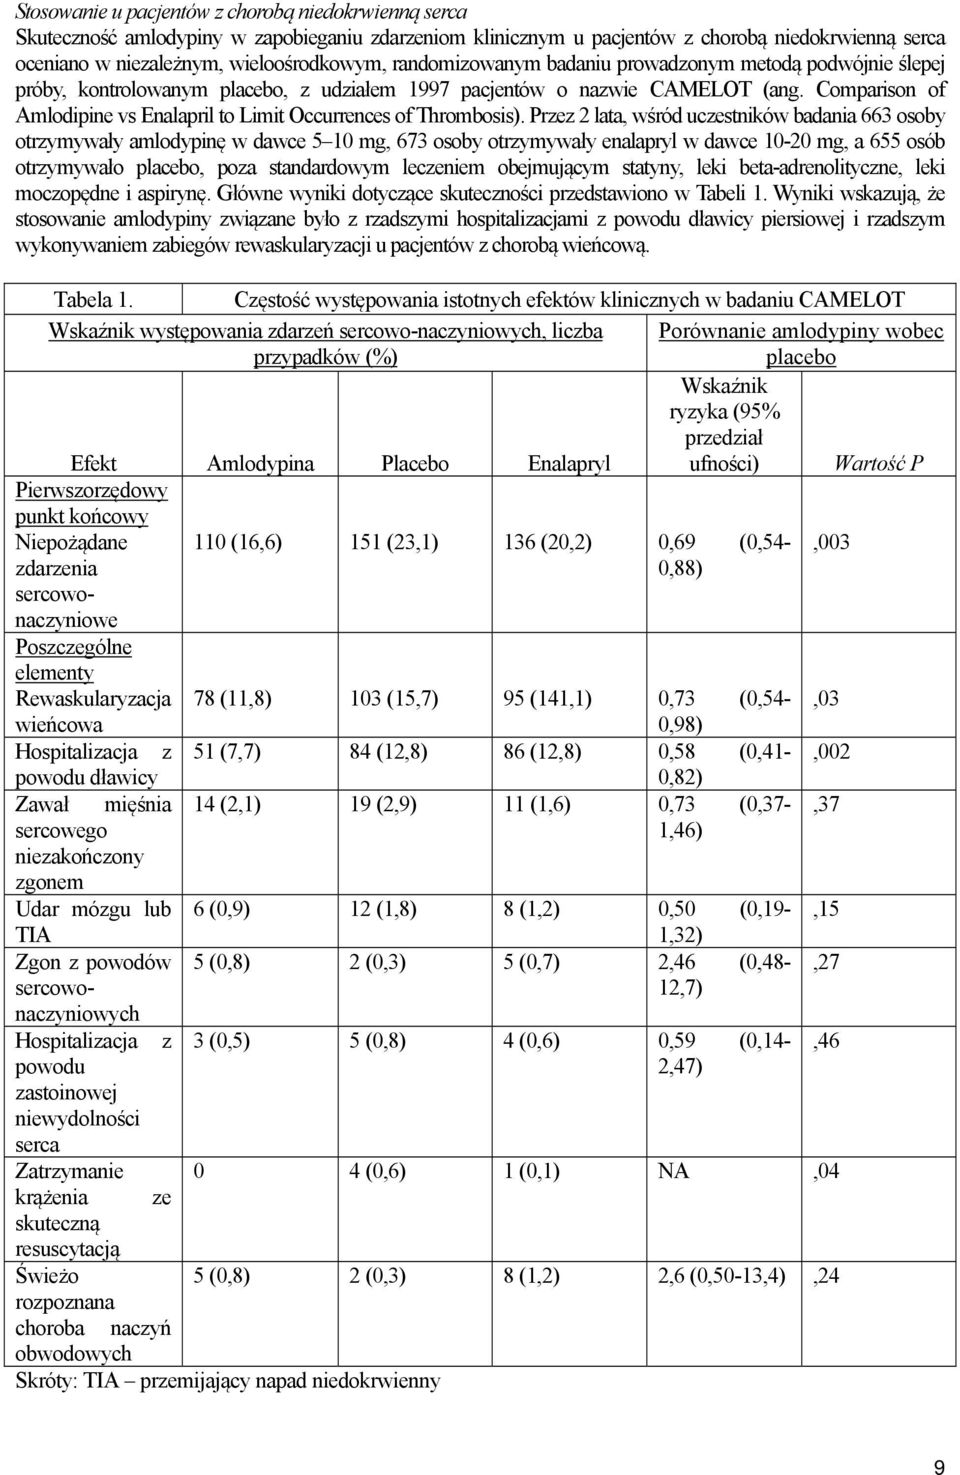 Comparison of Amlodipine vs Enalapril to Limit Occurrences of Thrombosis).